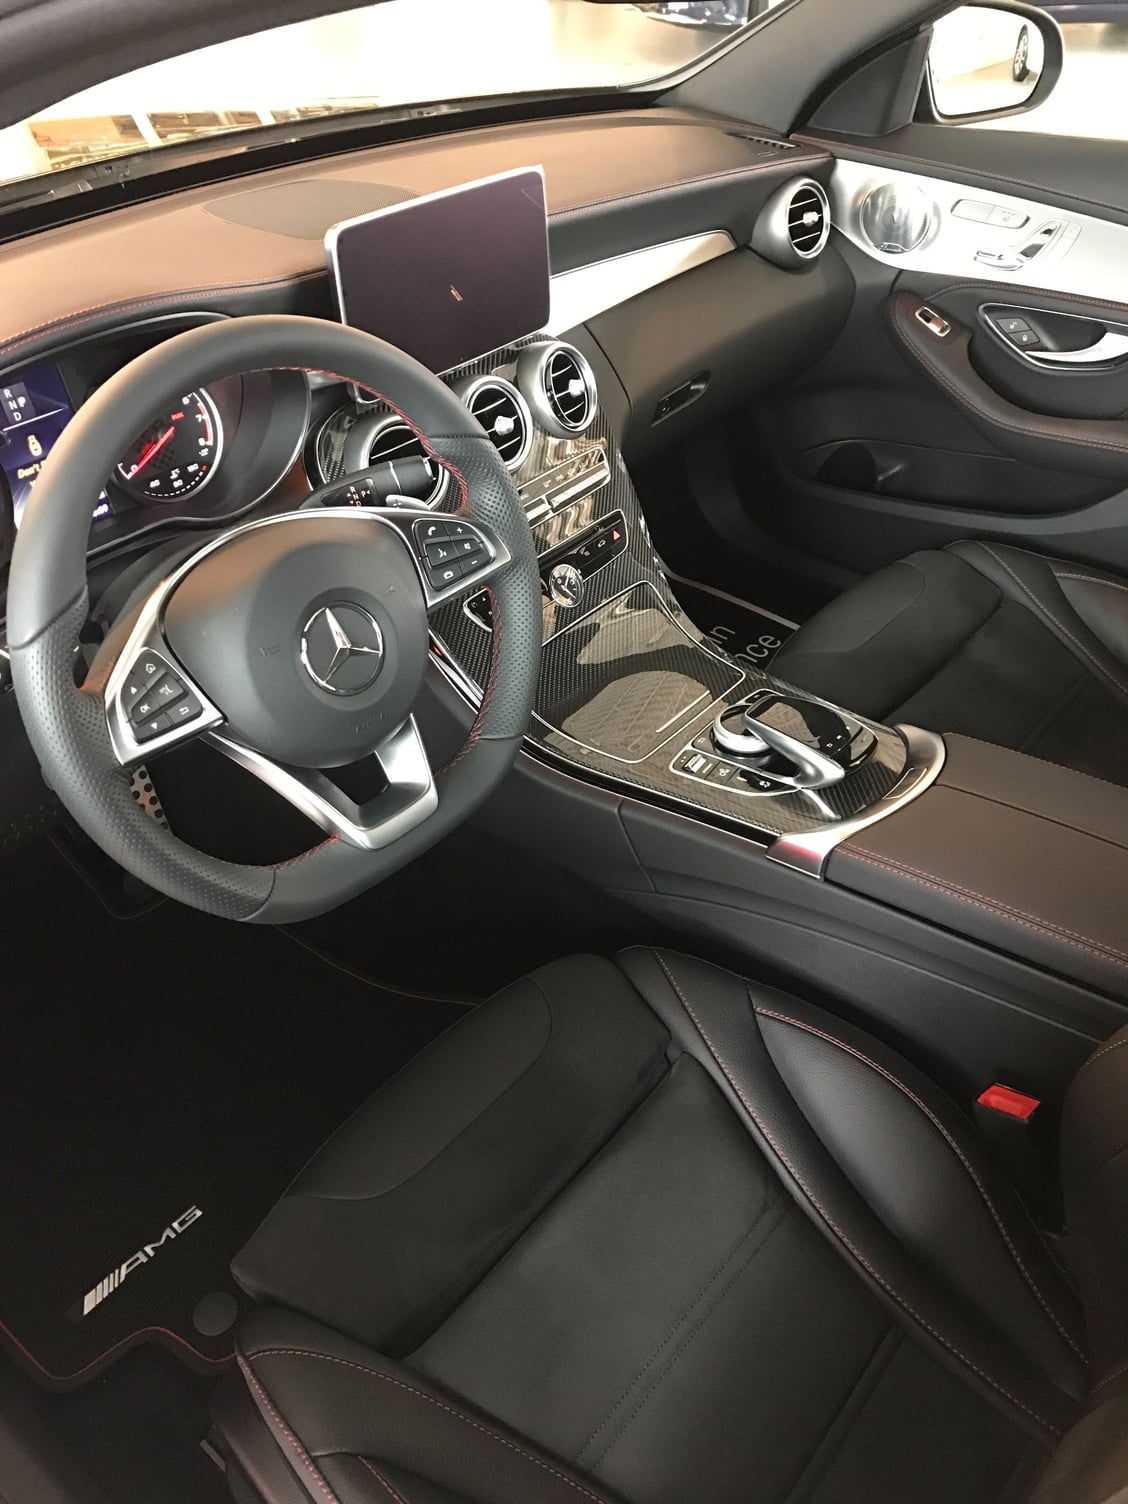 2017 Mercedes-Benz C43 AMG - 2017 AMG C43 Sedan Lease Takeover - Low Payment, Maintenance Included,Fully Optioned! - Used - VIN 55SWF6EB4HU215530 - 8,200 Miles - 6 cyl - AWD - Automatic - Sedan - Black - Cleveland, OH 44039, United States